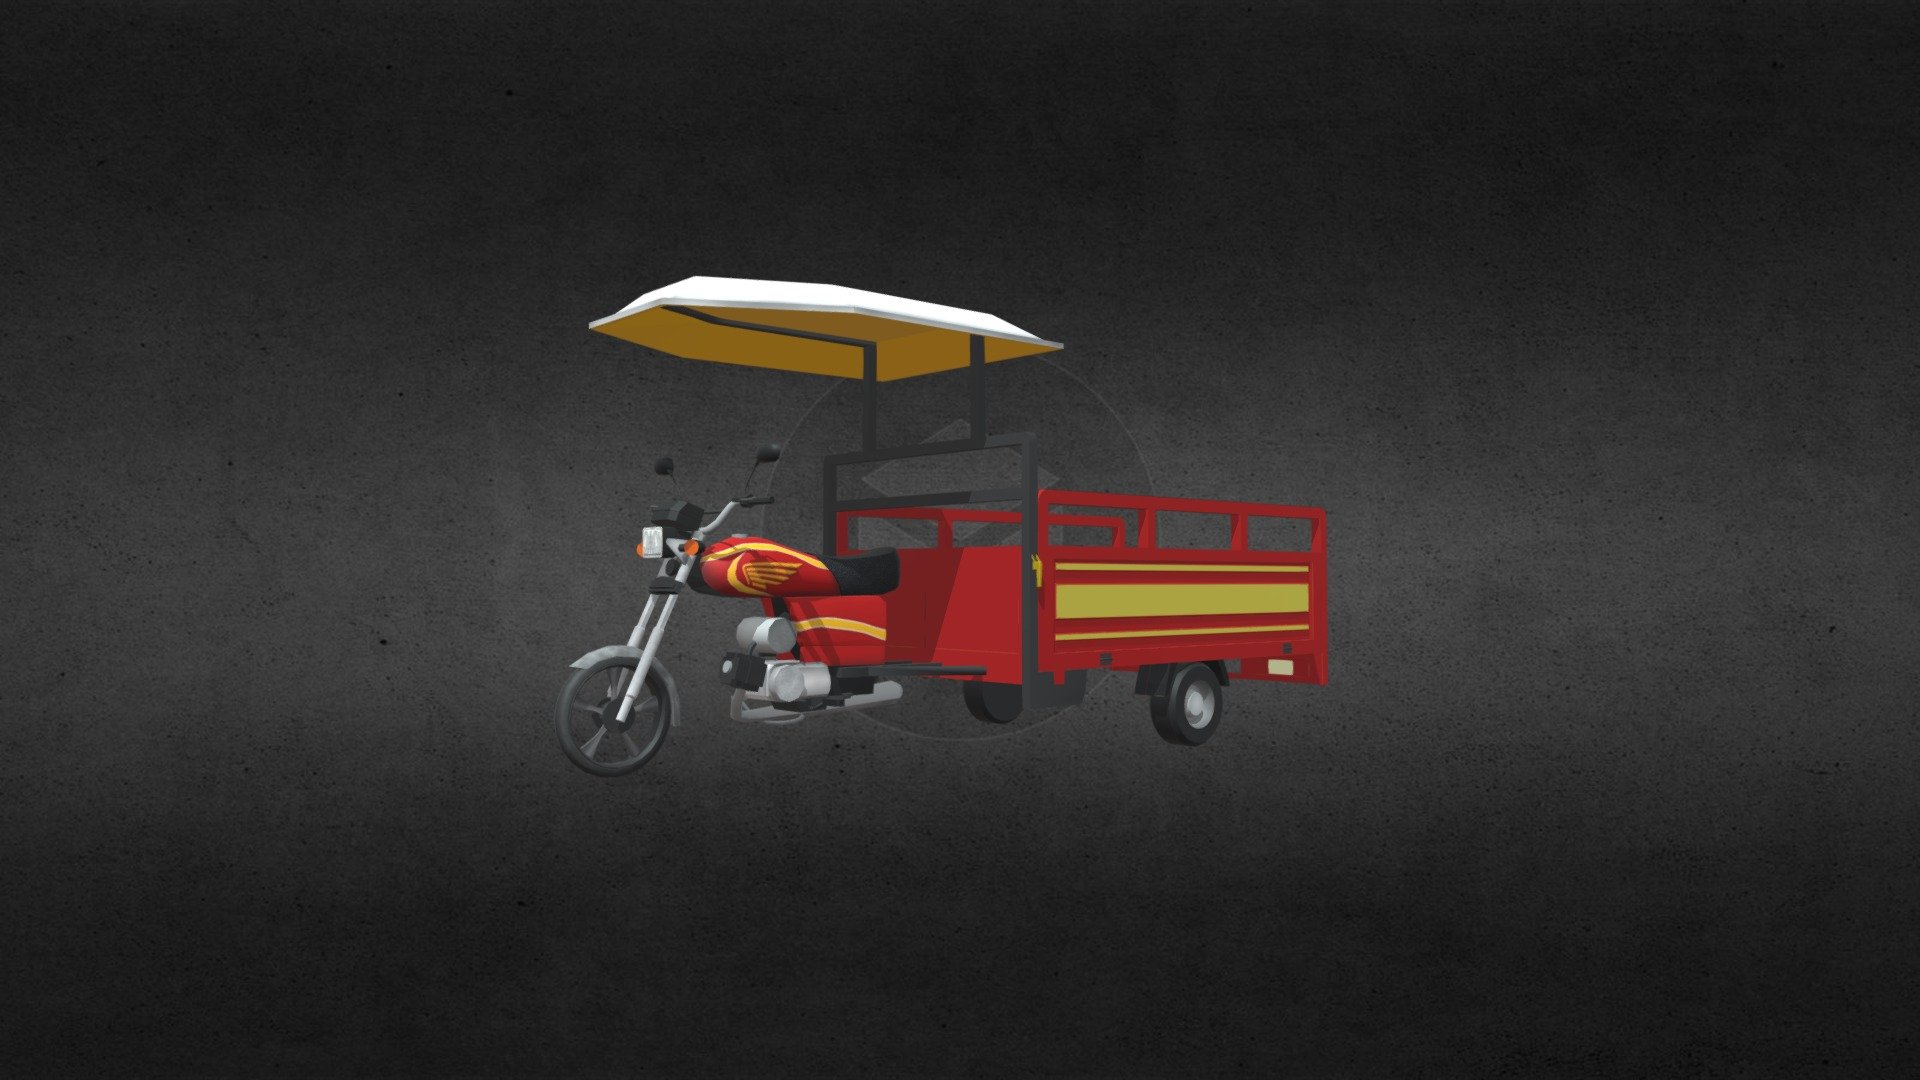 Qingqi Rickshaw Tuk Tuk Auto Rikshaw.
Modeled in Blender and textured in photoshop and blender.

Email me if you need this model or other auto rickshaw models, I can optimize its geometry as well as reduce materials to single material, texture atlas 3d model